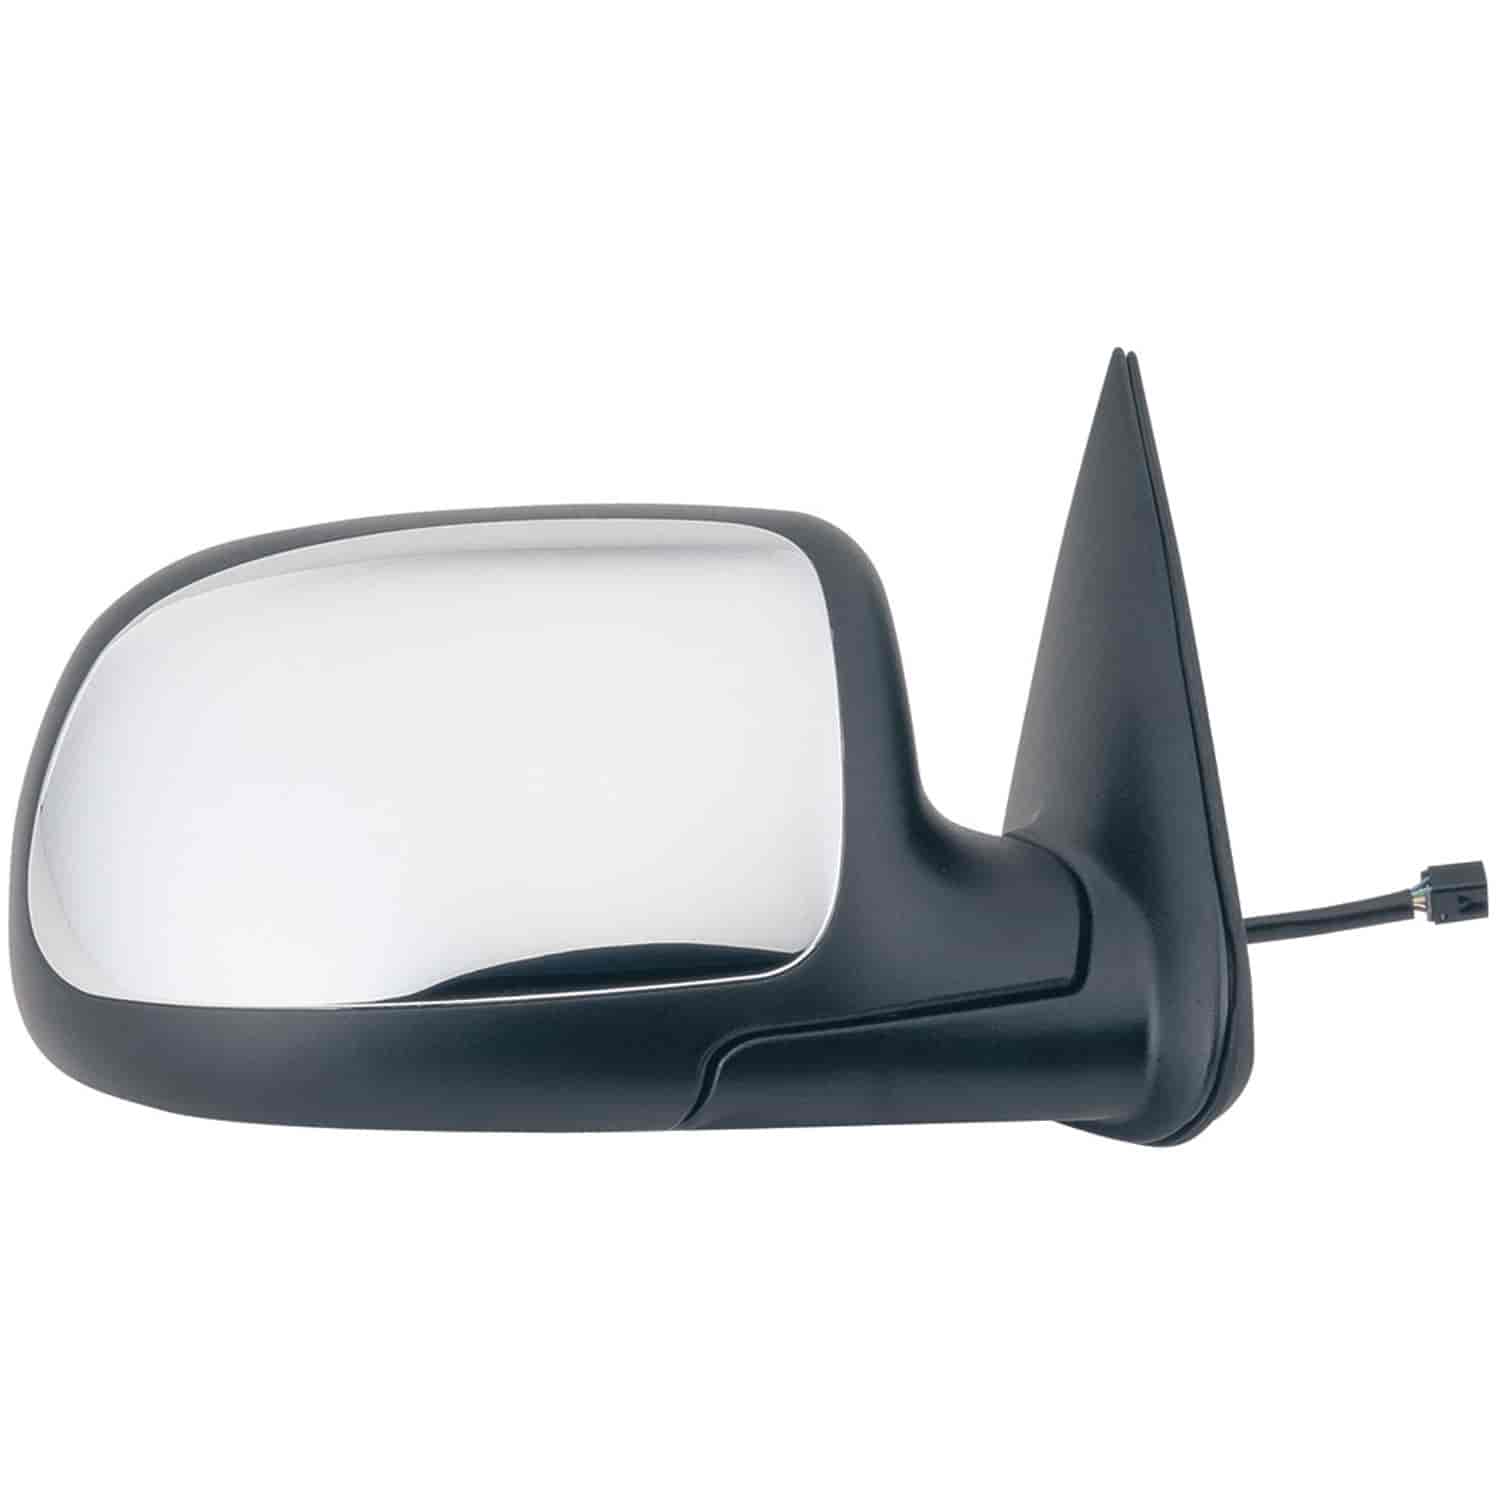 OEM Style Replacement mirror for 99-02 Chevy Silverado